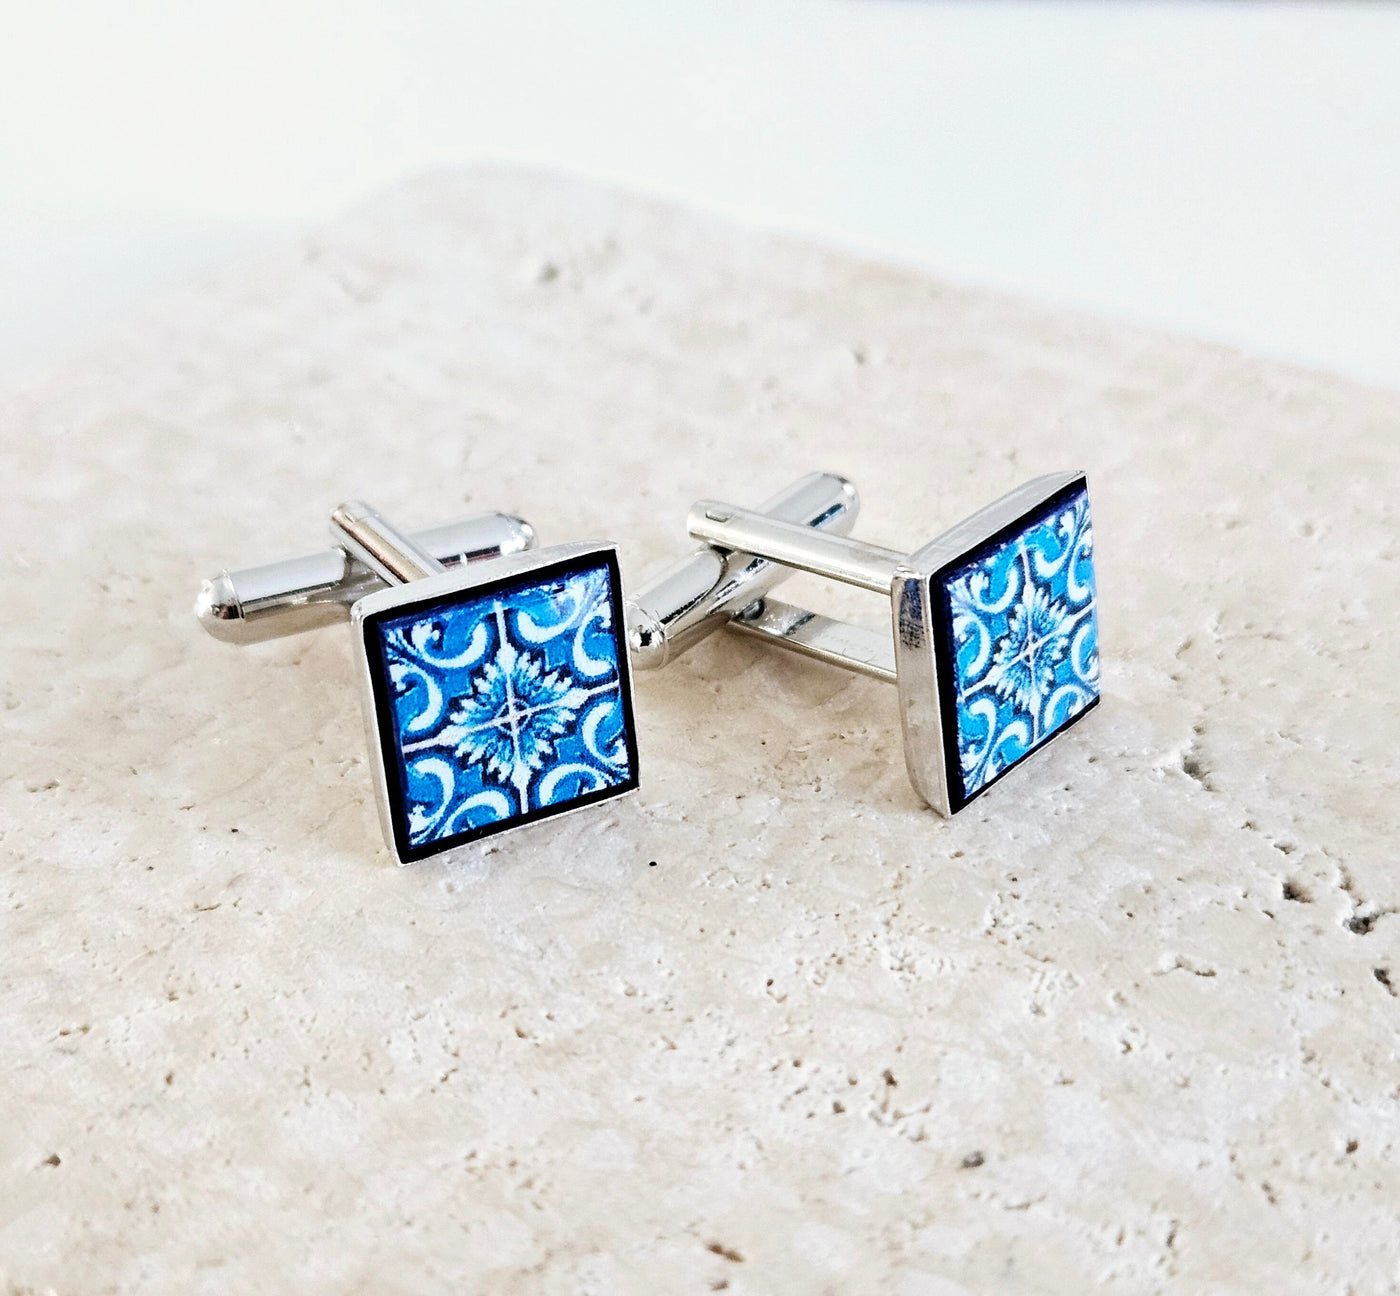 Portugal Retro Blue Tile Cufflink Majolica Tile Groom Wedding Gift Something Blue for Him Father Dad Gift Corporate Suit Accessory Men Gift